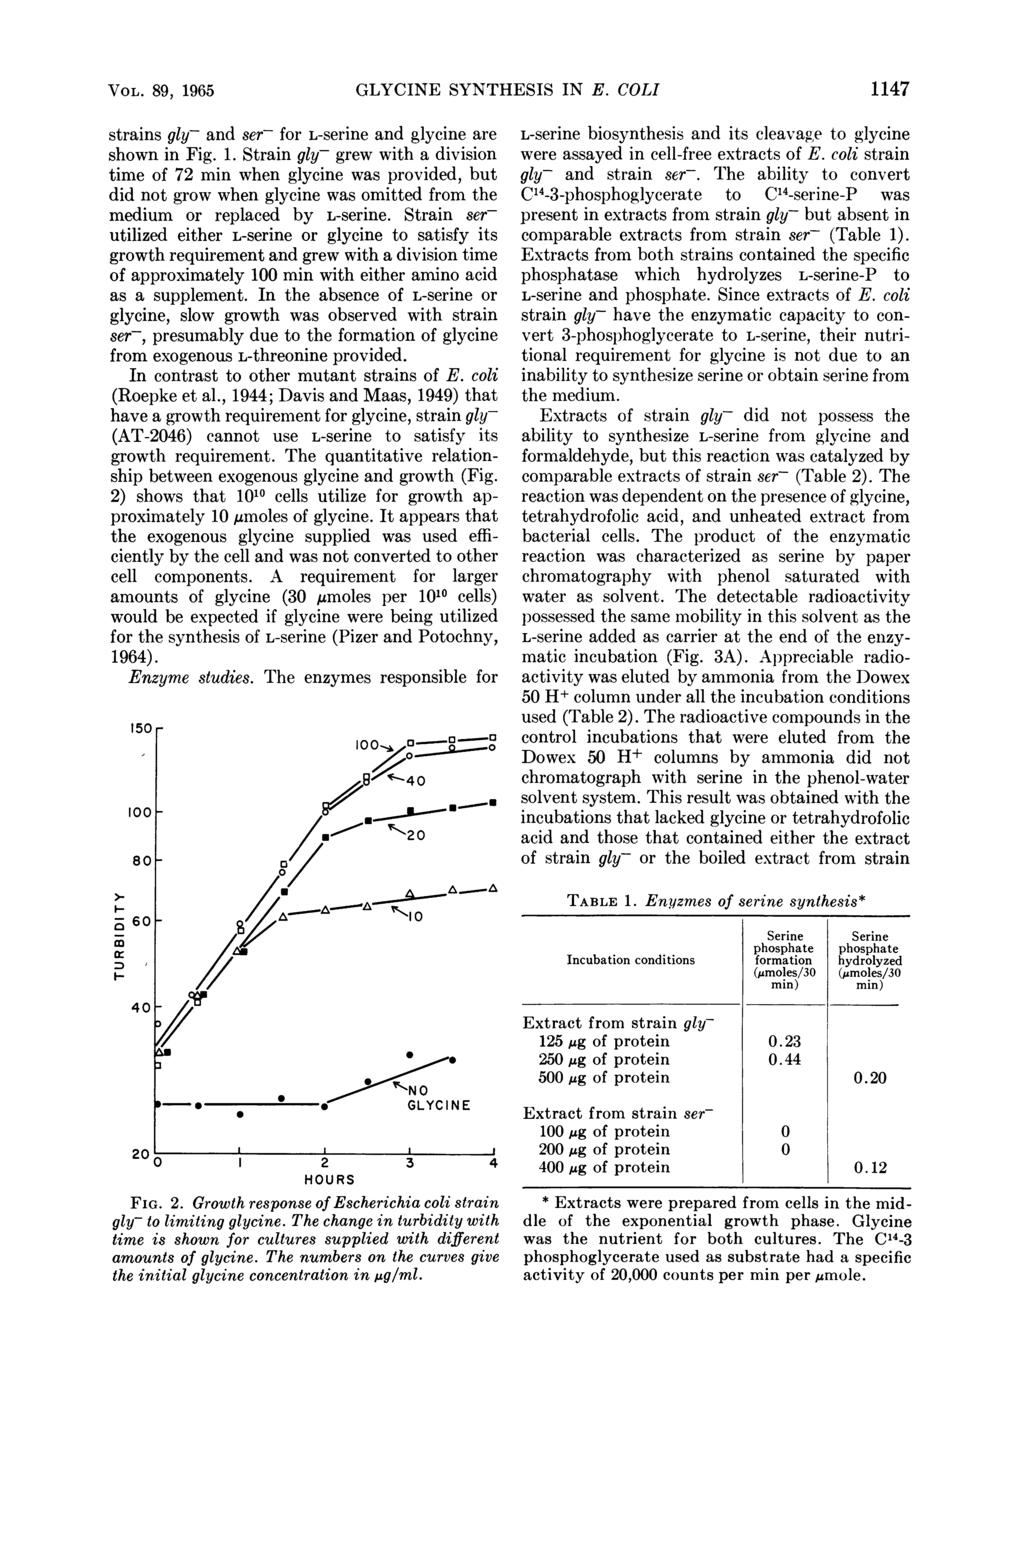 VOL. 89, 1965 strains gly- and ser- for L-serine and glycine are shown in Fig. 1. Strain gly- grew with a division time of 72 min when glycine was provided, but did not grow when glycine was omitted from the medium or replaced by L-serine.